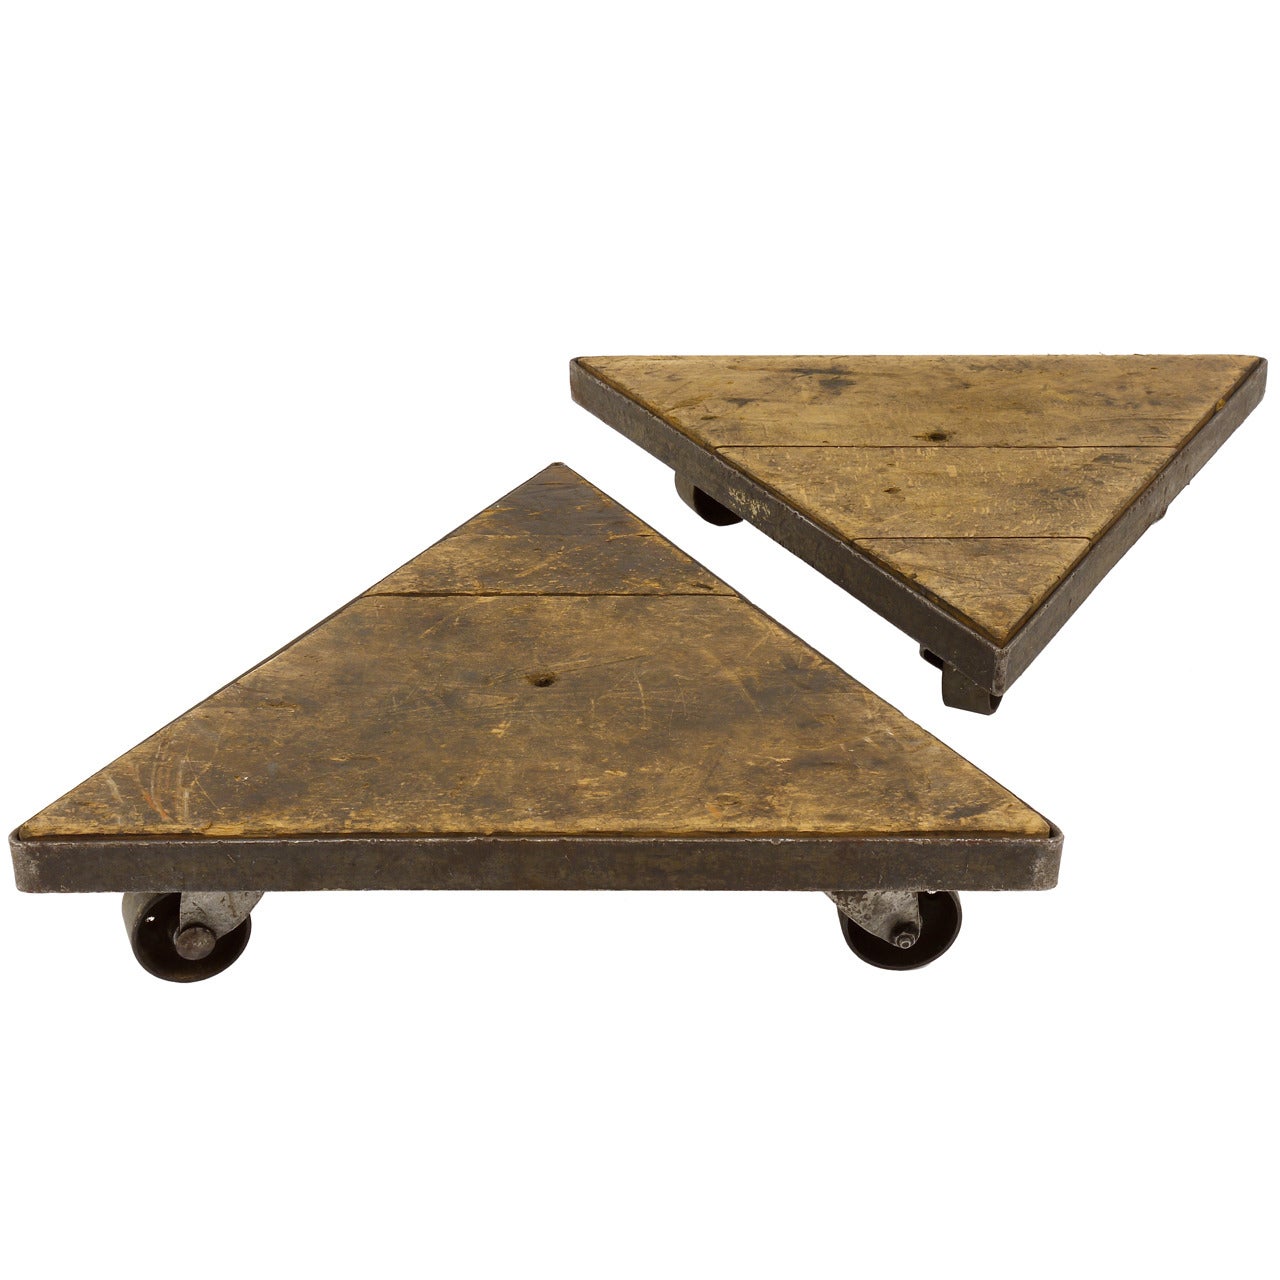 A Pair of 1940s Triangular Industrial Iron Wheel Board Dolly Carts